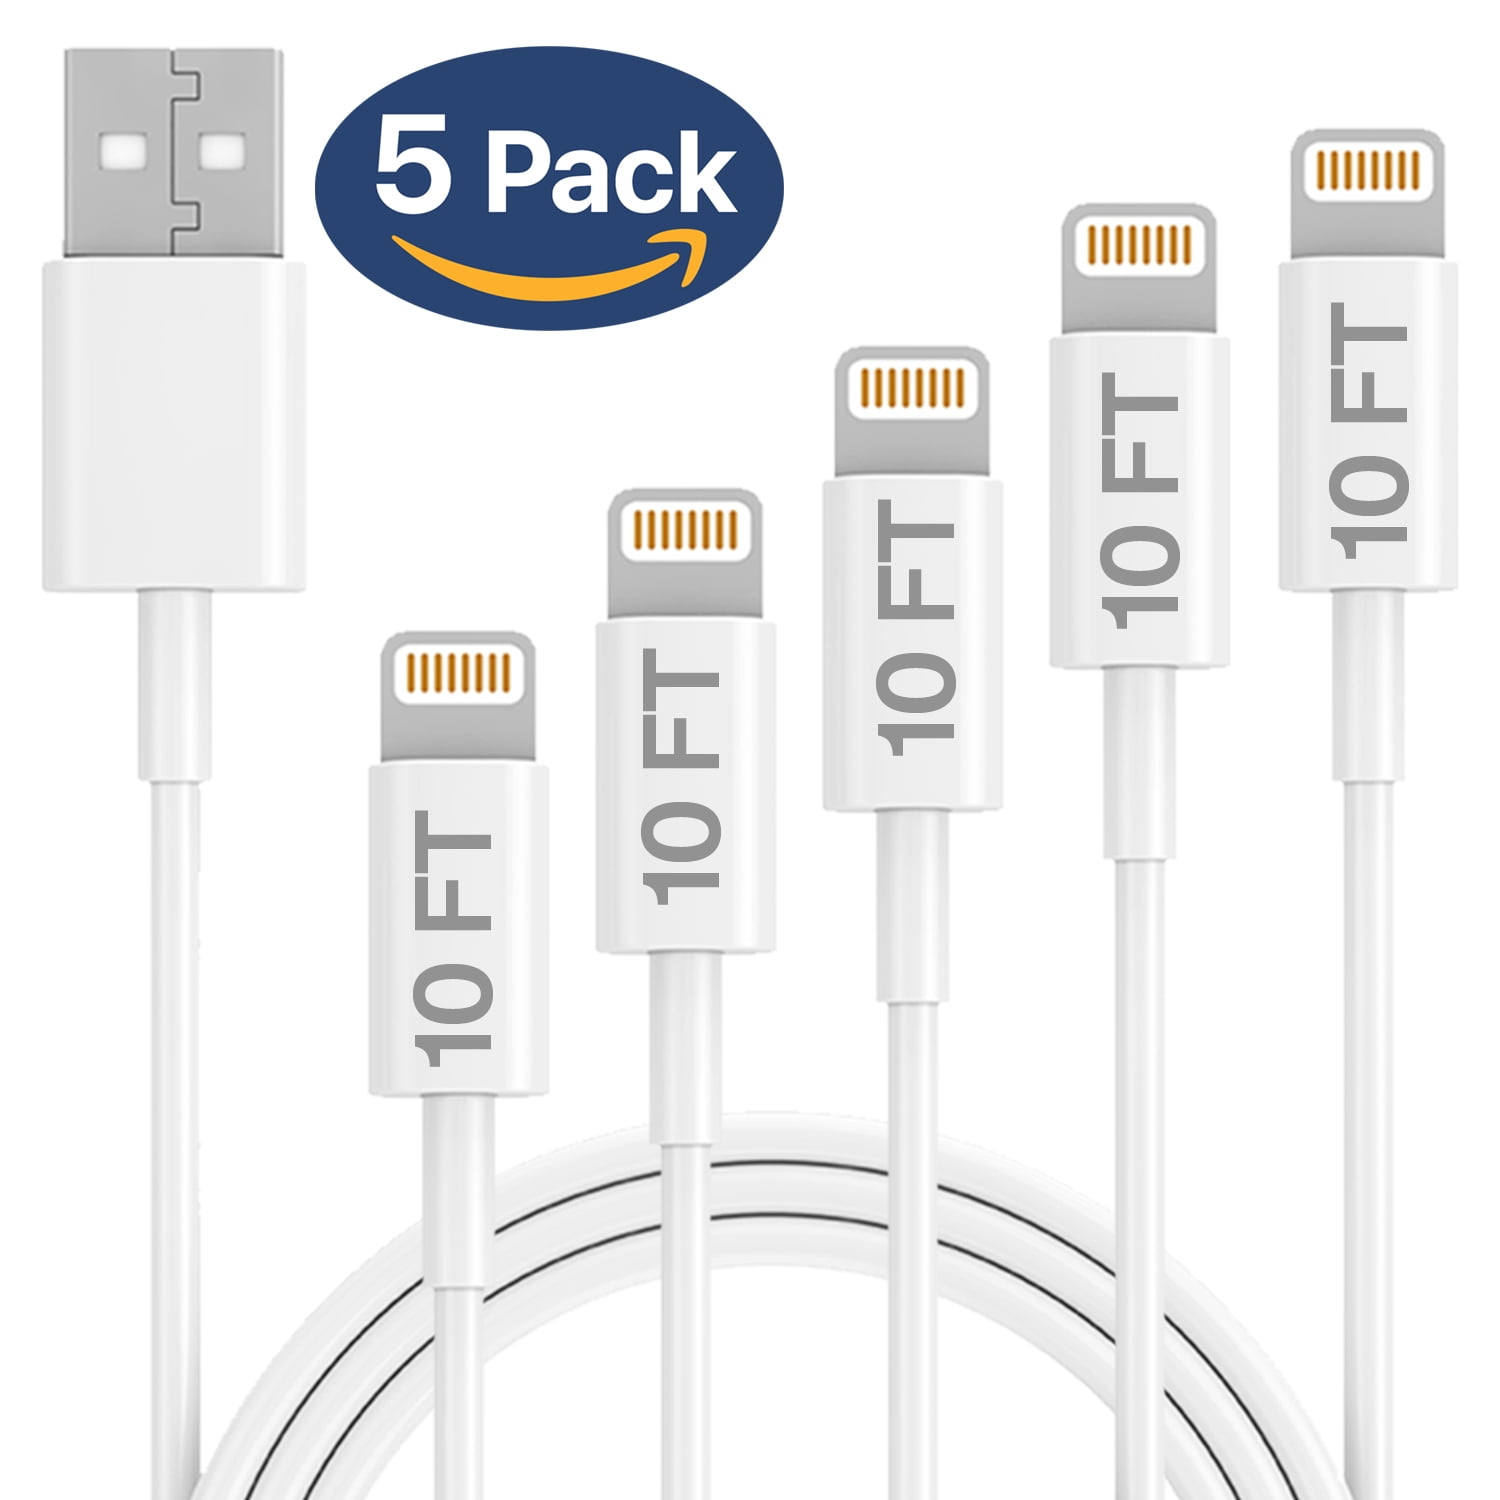 Mfi Certified Lightning Cable 5Pack 3ft 6ft 10ft Nylon Braided USB Fast Charging& Syncing Cord Compatible iPhone Charger XS/Max/XR/8/Plus/ 7/Plus/6S/Plus